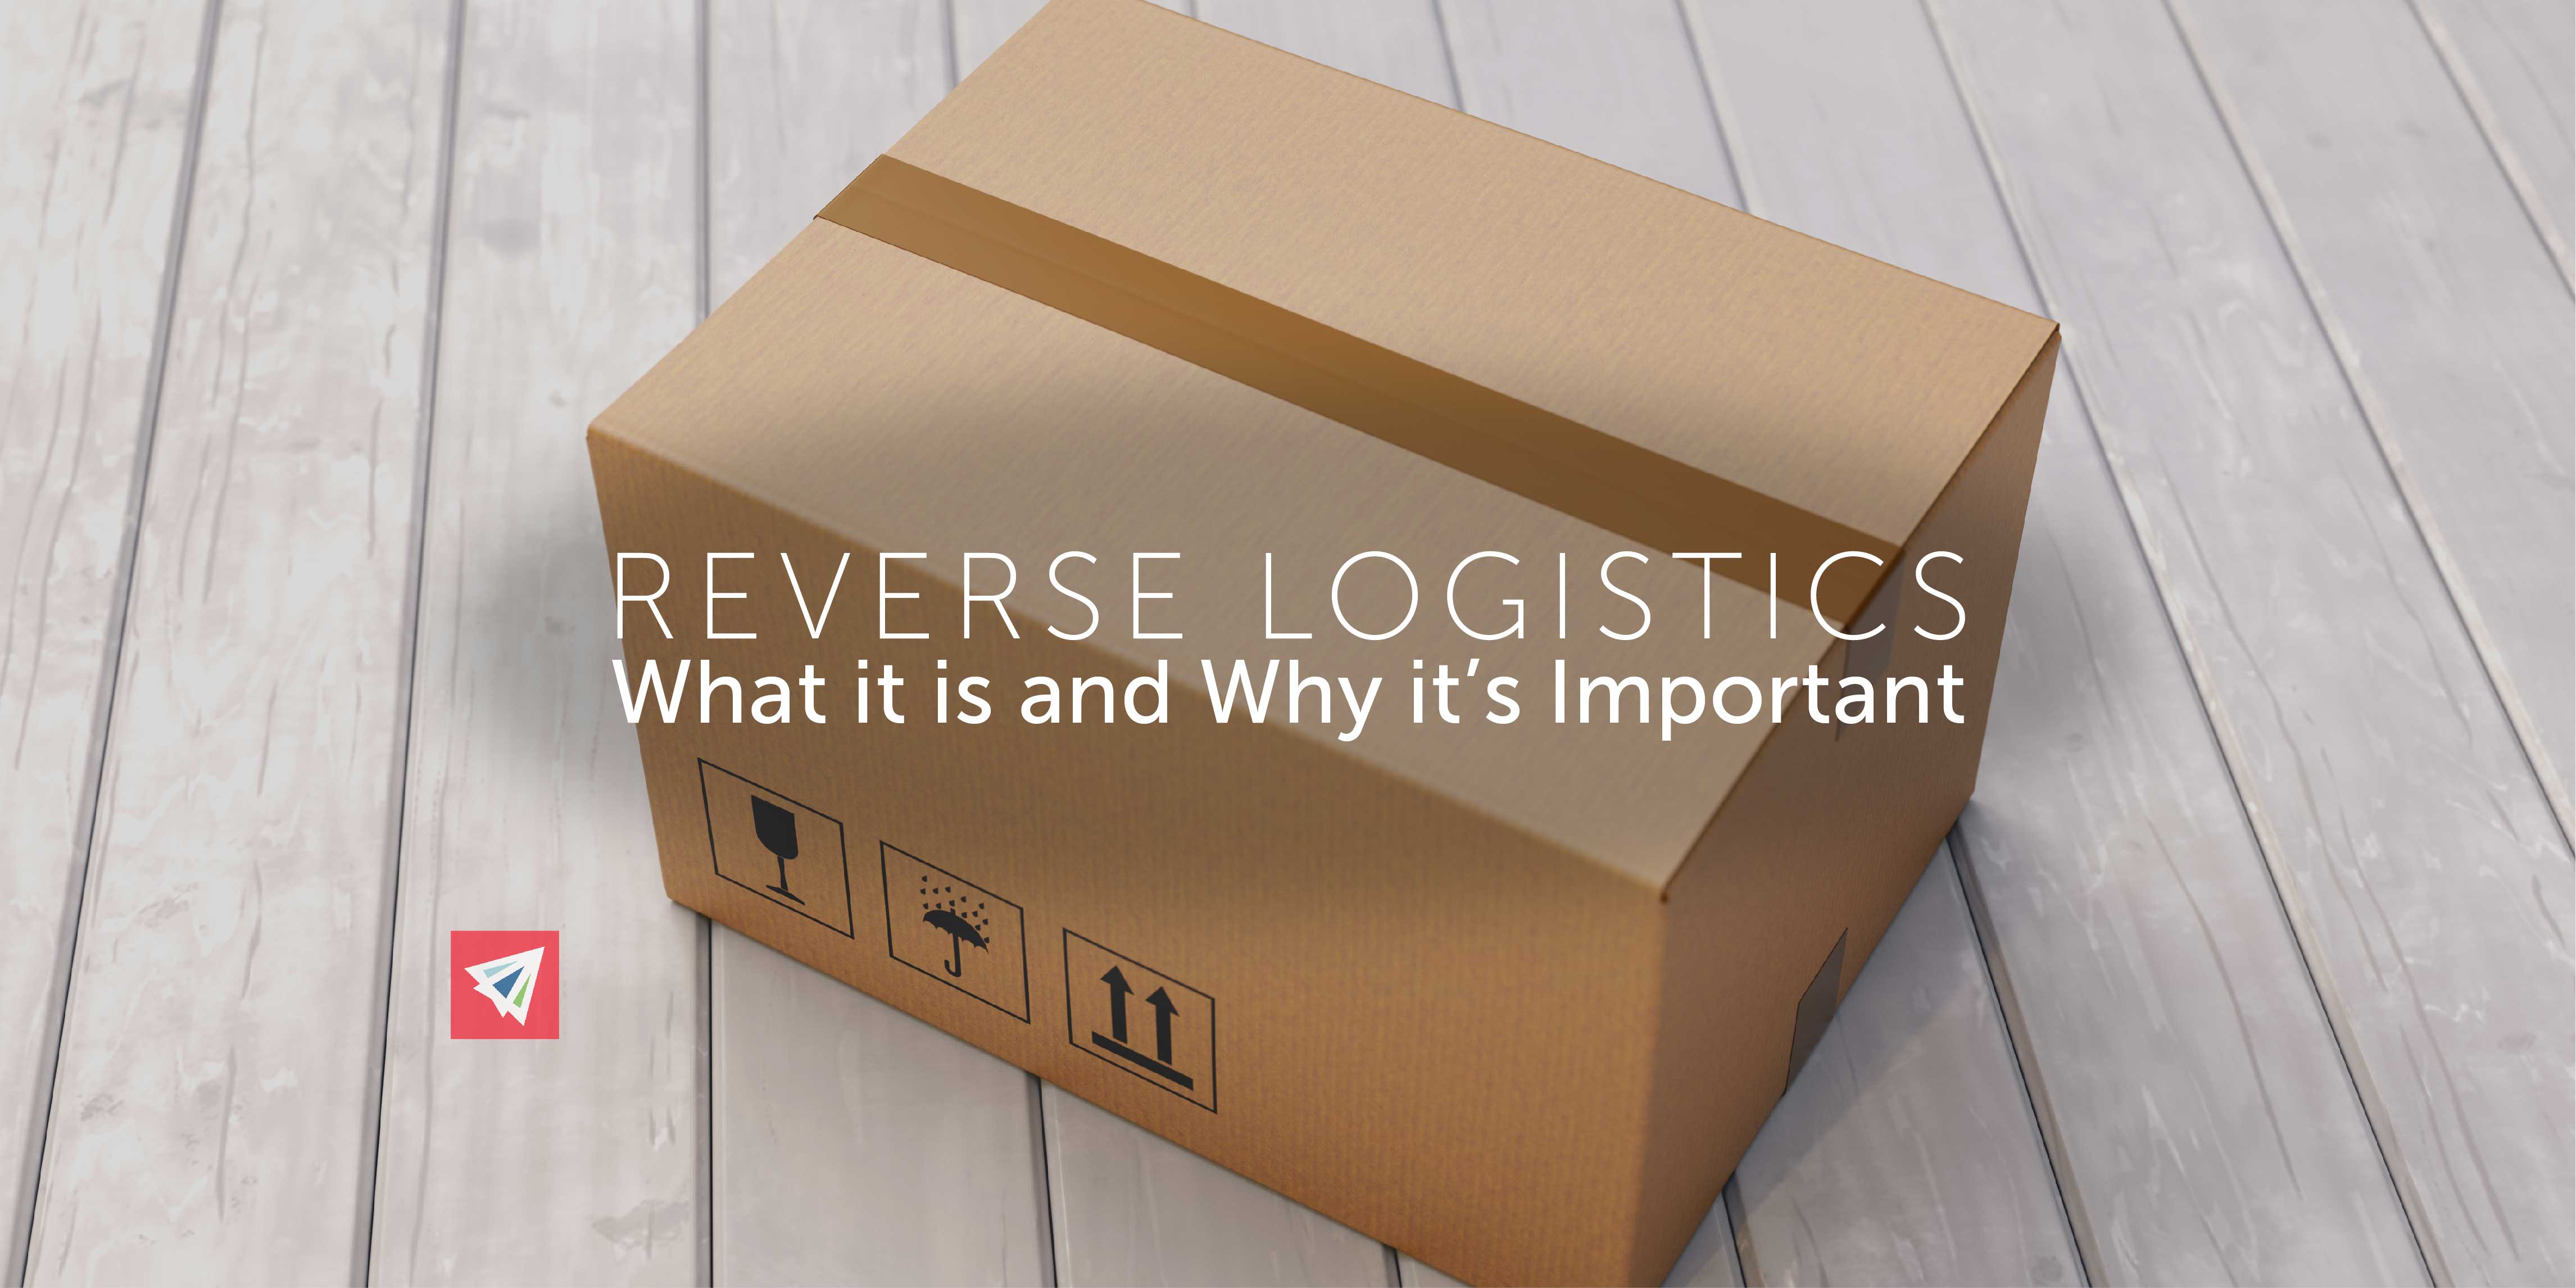 Reverse Logistics - What it is and Why it's Important